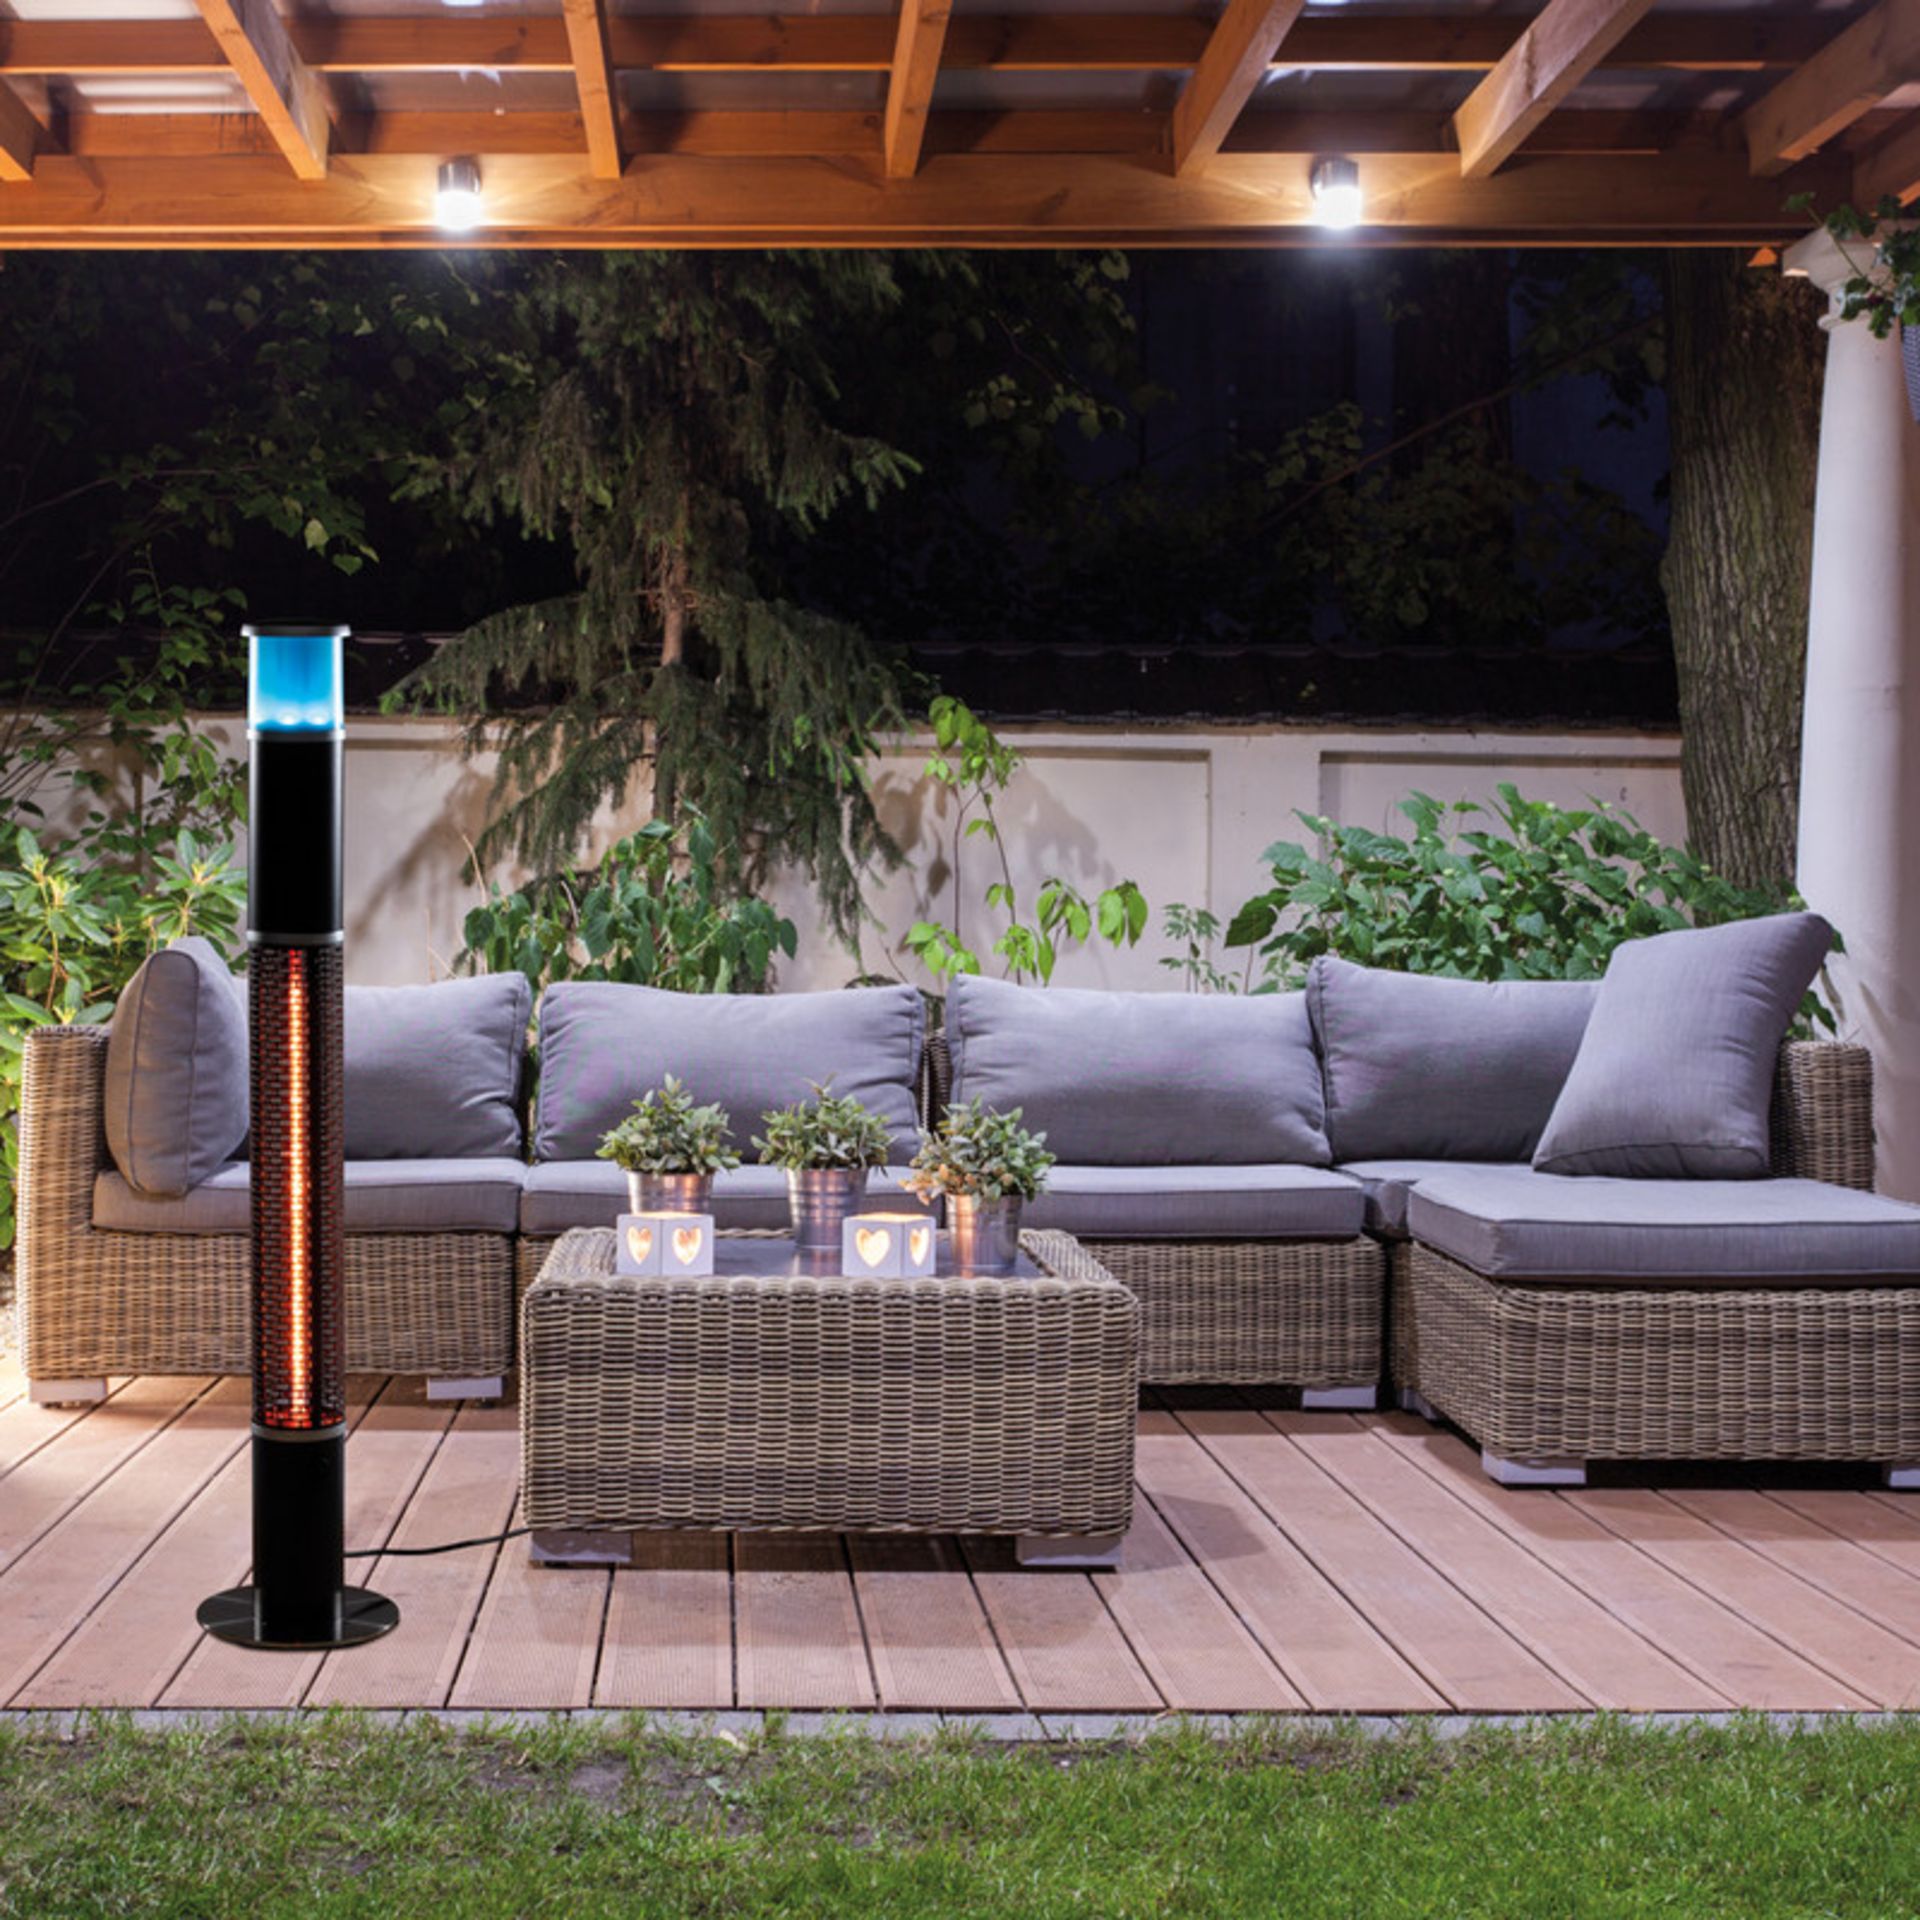 DAEWOO 3 IN 1 PATIO HEATER WITH BUILT IN SPEAKER AND COLOUR CHANGING LED LIGHT BRAND NEW RRP £149.99 - Image 2 of 2